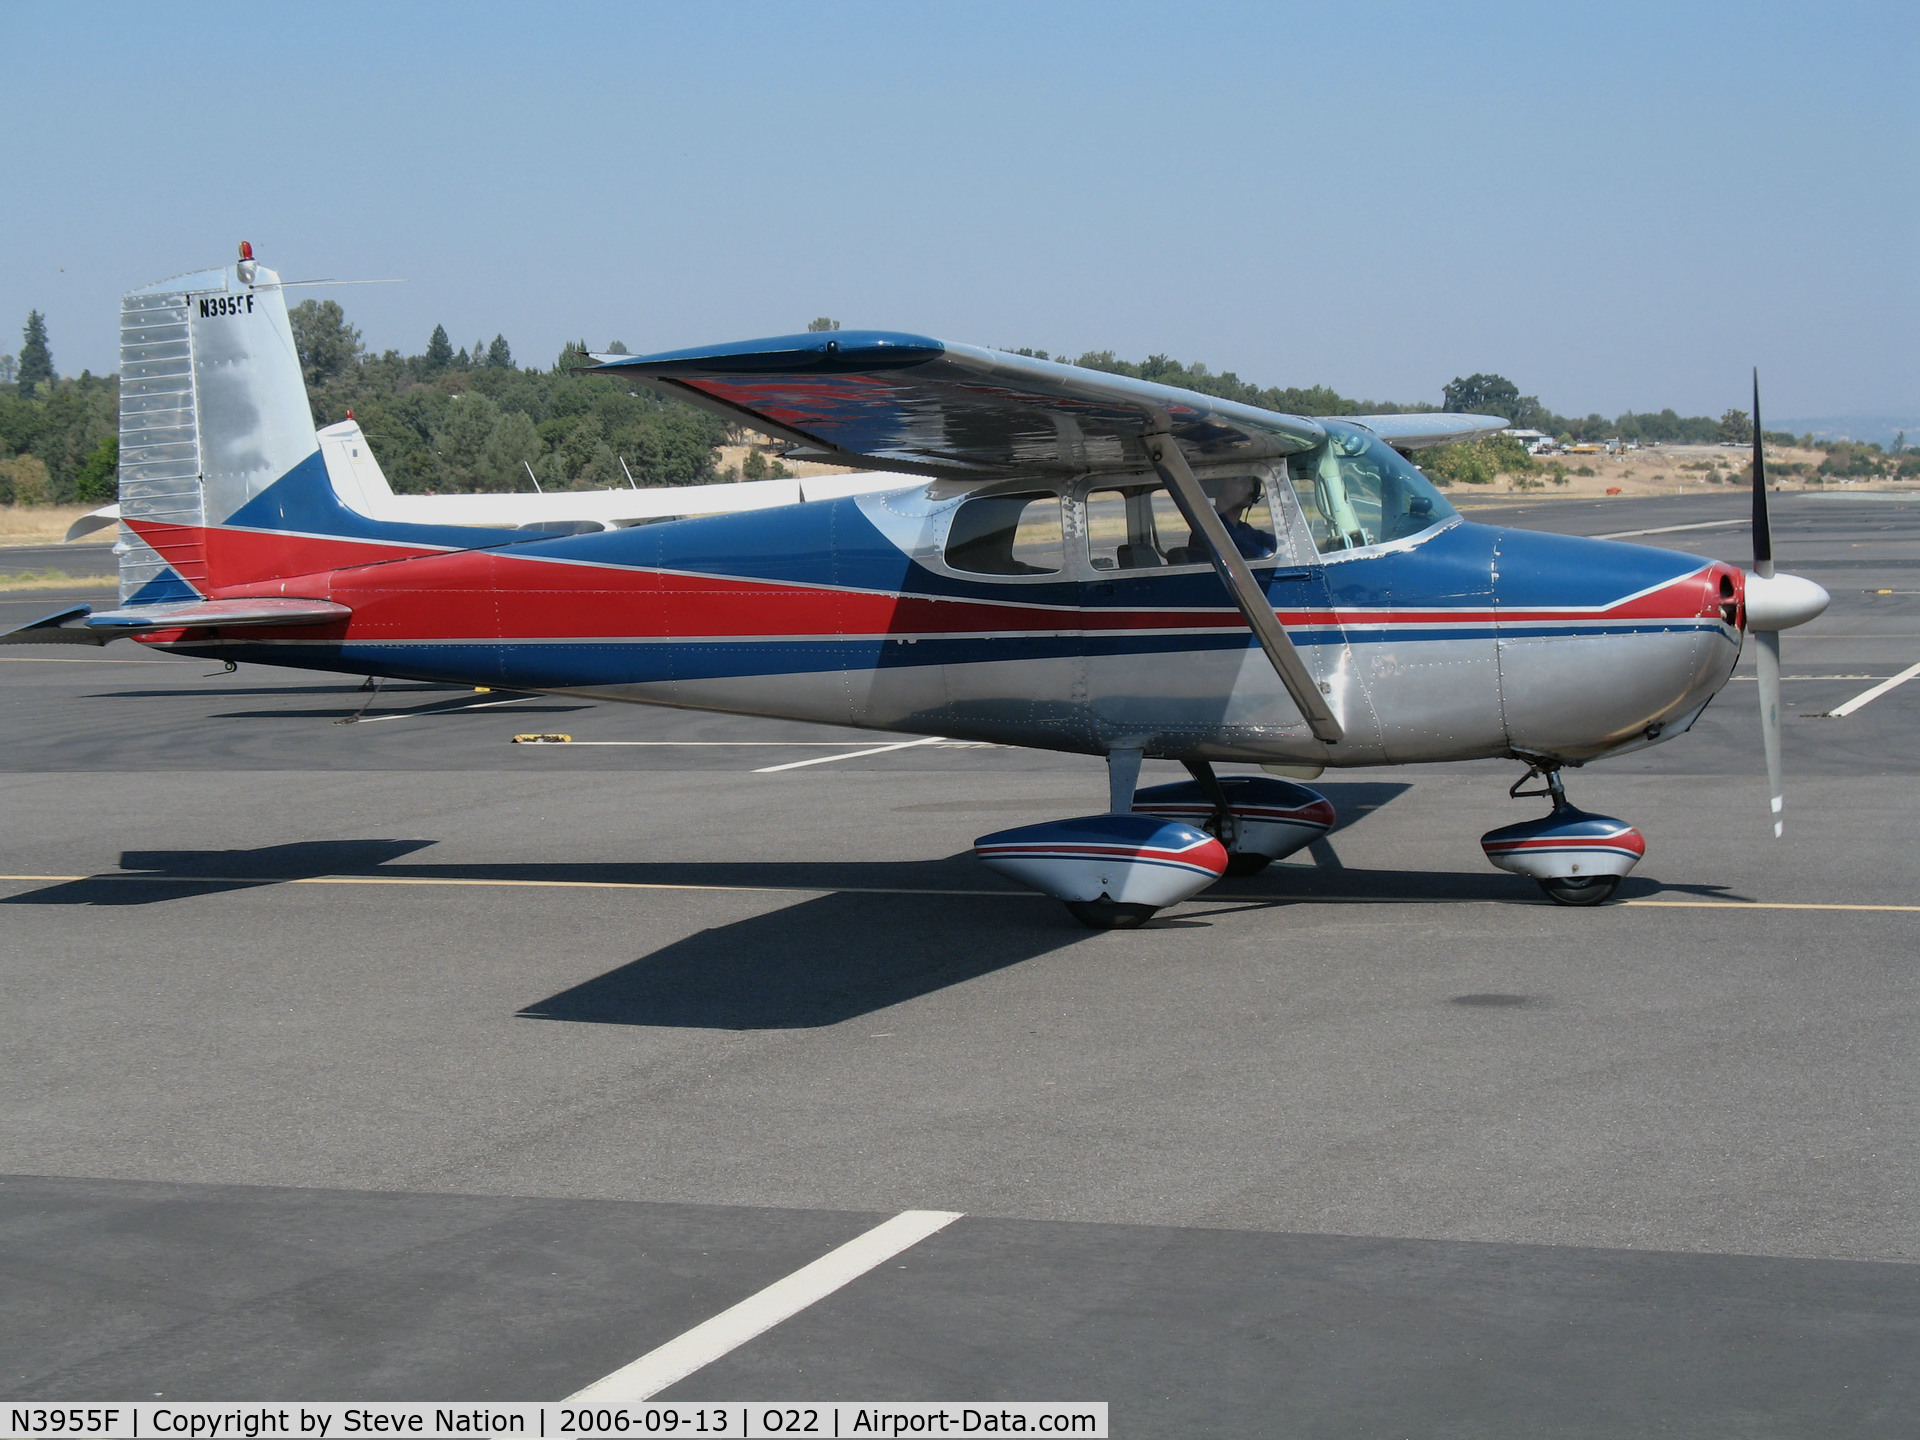 N3955F, 1958 Cessna 172 C/N 36855, Springfield Flying Service 1958 Cessna 172 Skyhawk taxiing in @ Columbia, CA home base